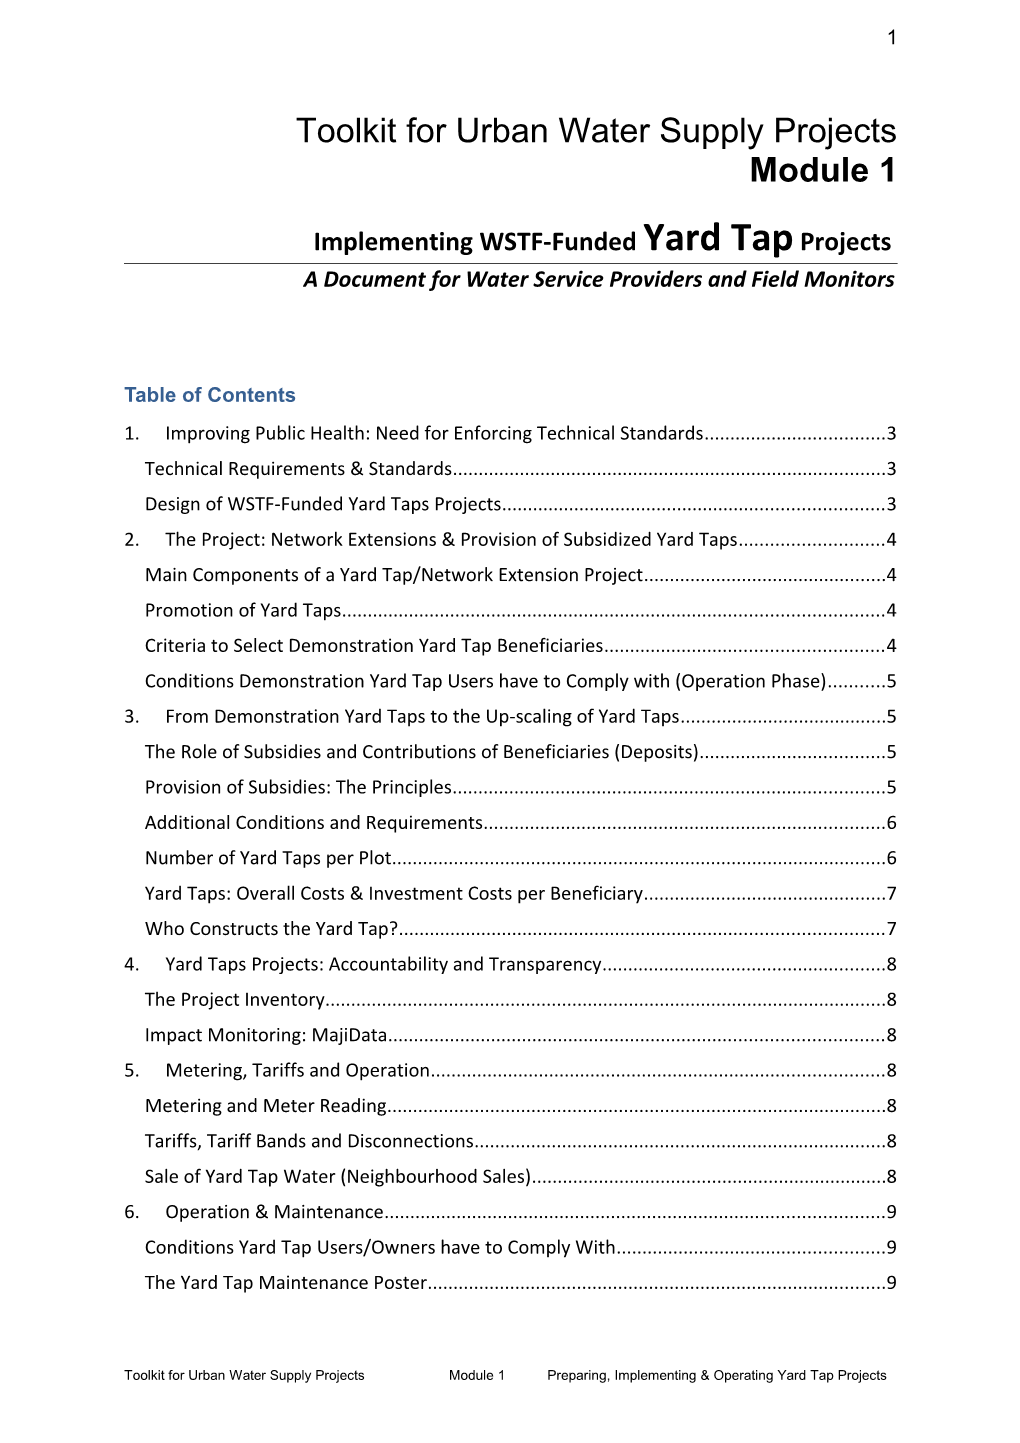 Implementing WSTF-Funded Yard Tap Projects